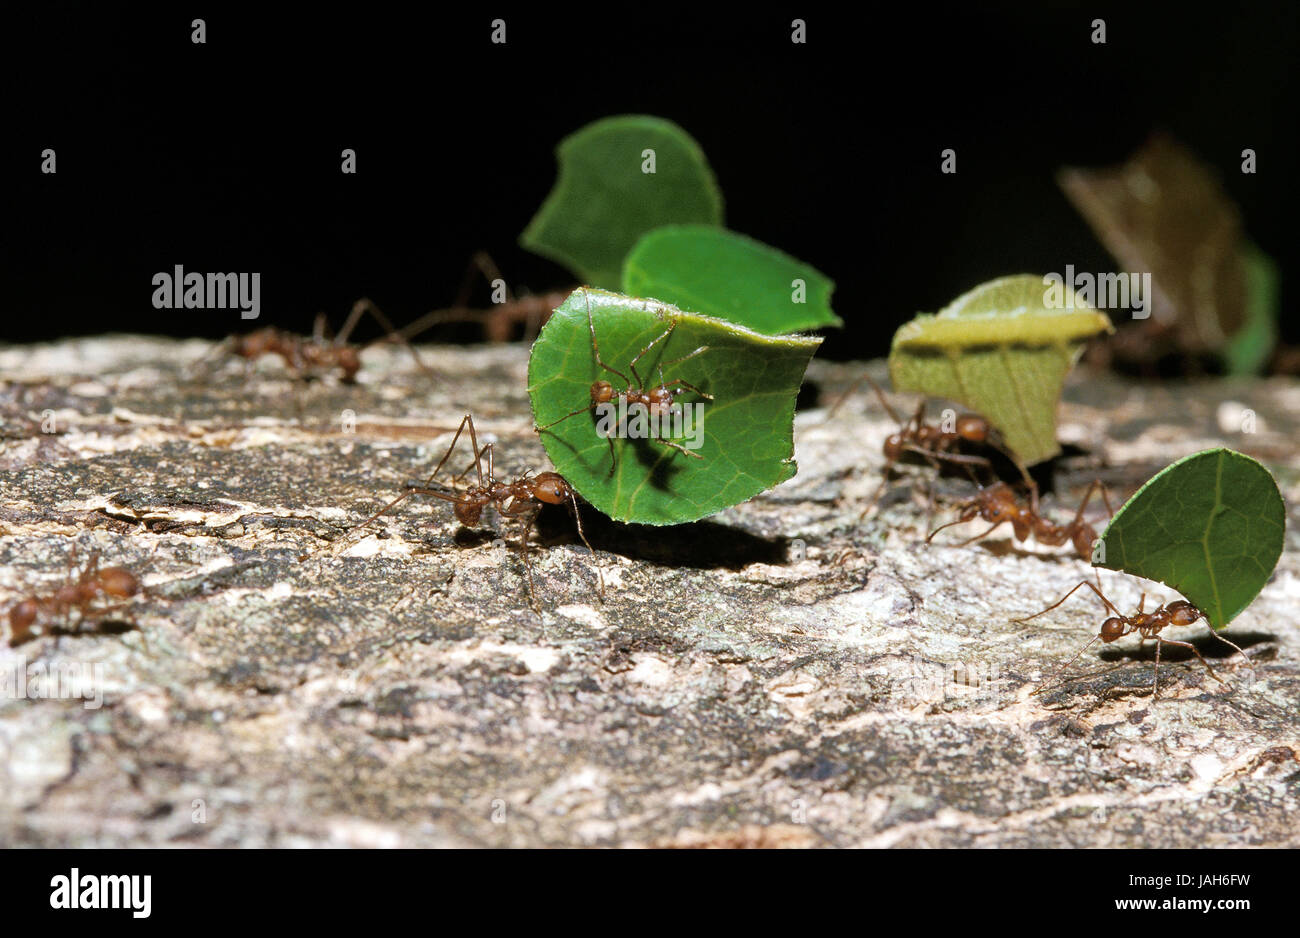 Leaf guts ant or Atta,Atta spec.,adult animal,carry,leaf part,ant heap,Costa Rica, Stock Photo